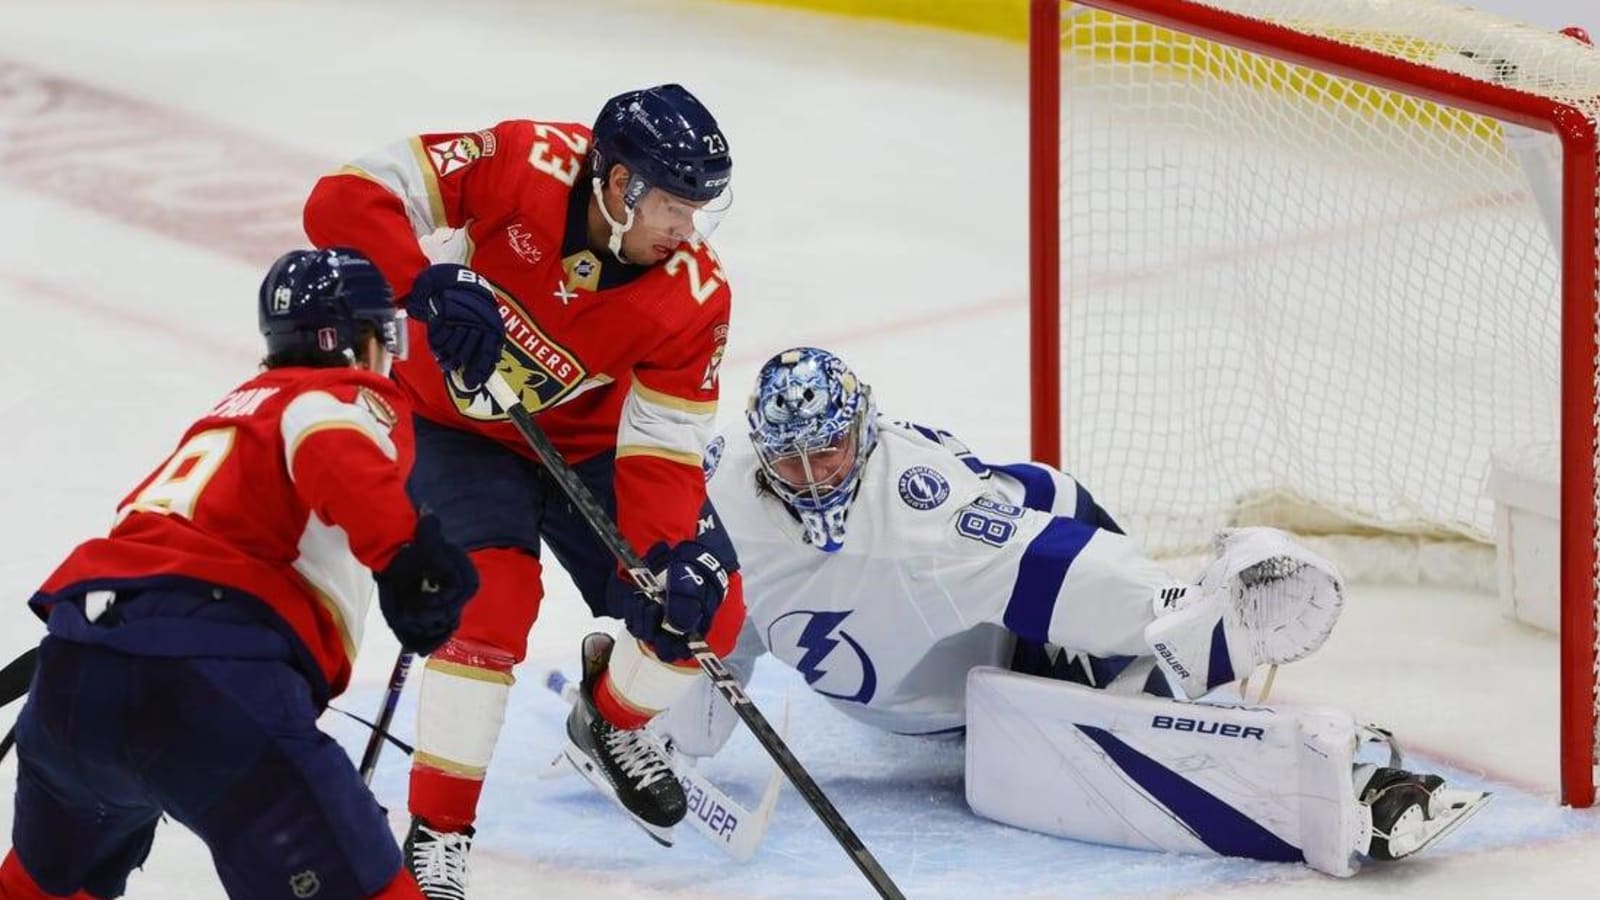 Lightning get crack at home ice down 2-0 to Panthers | Yardbarker